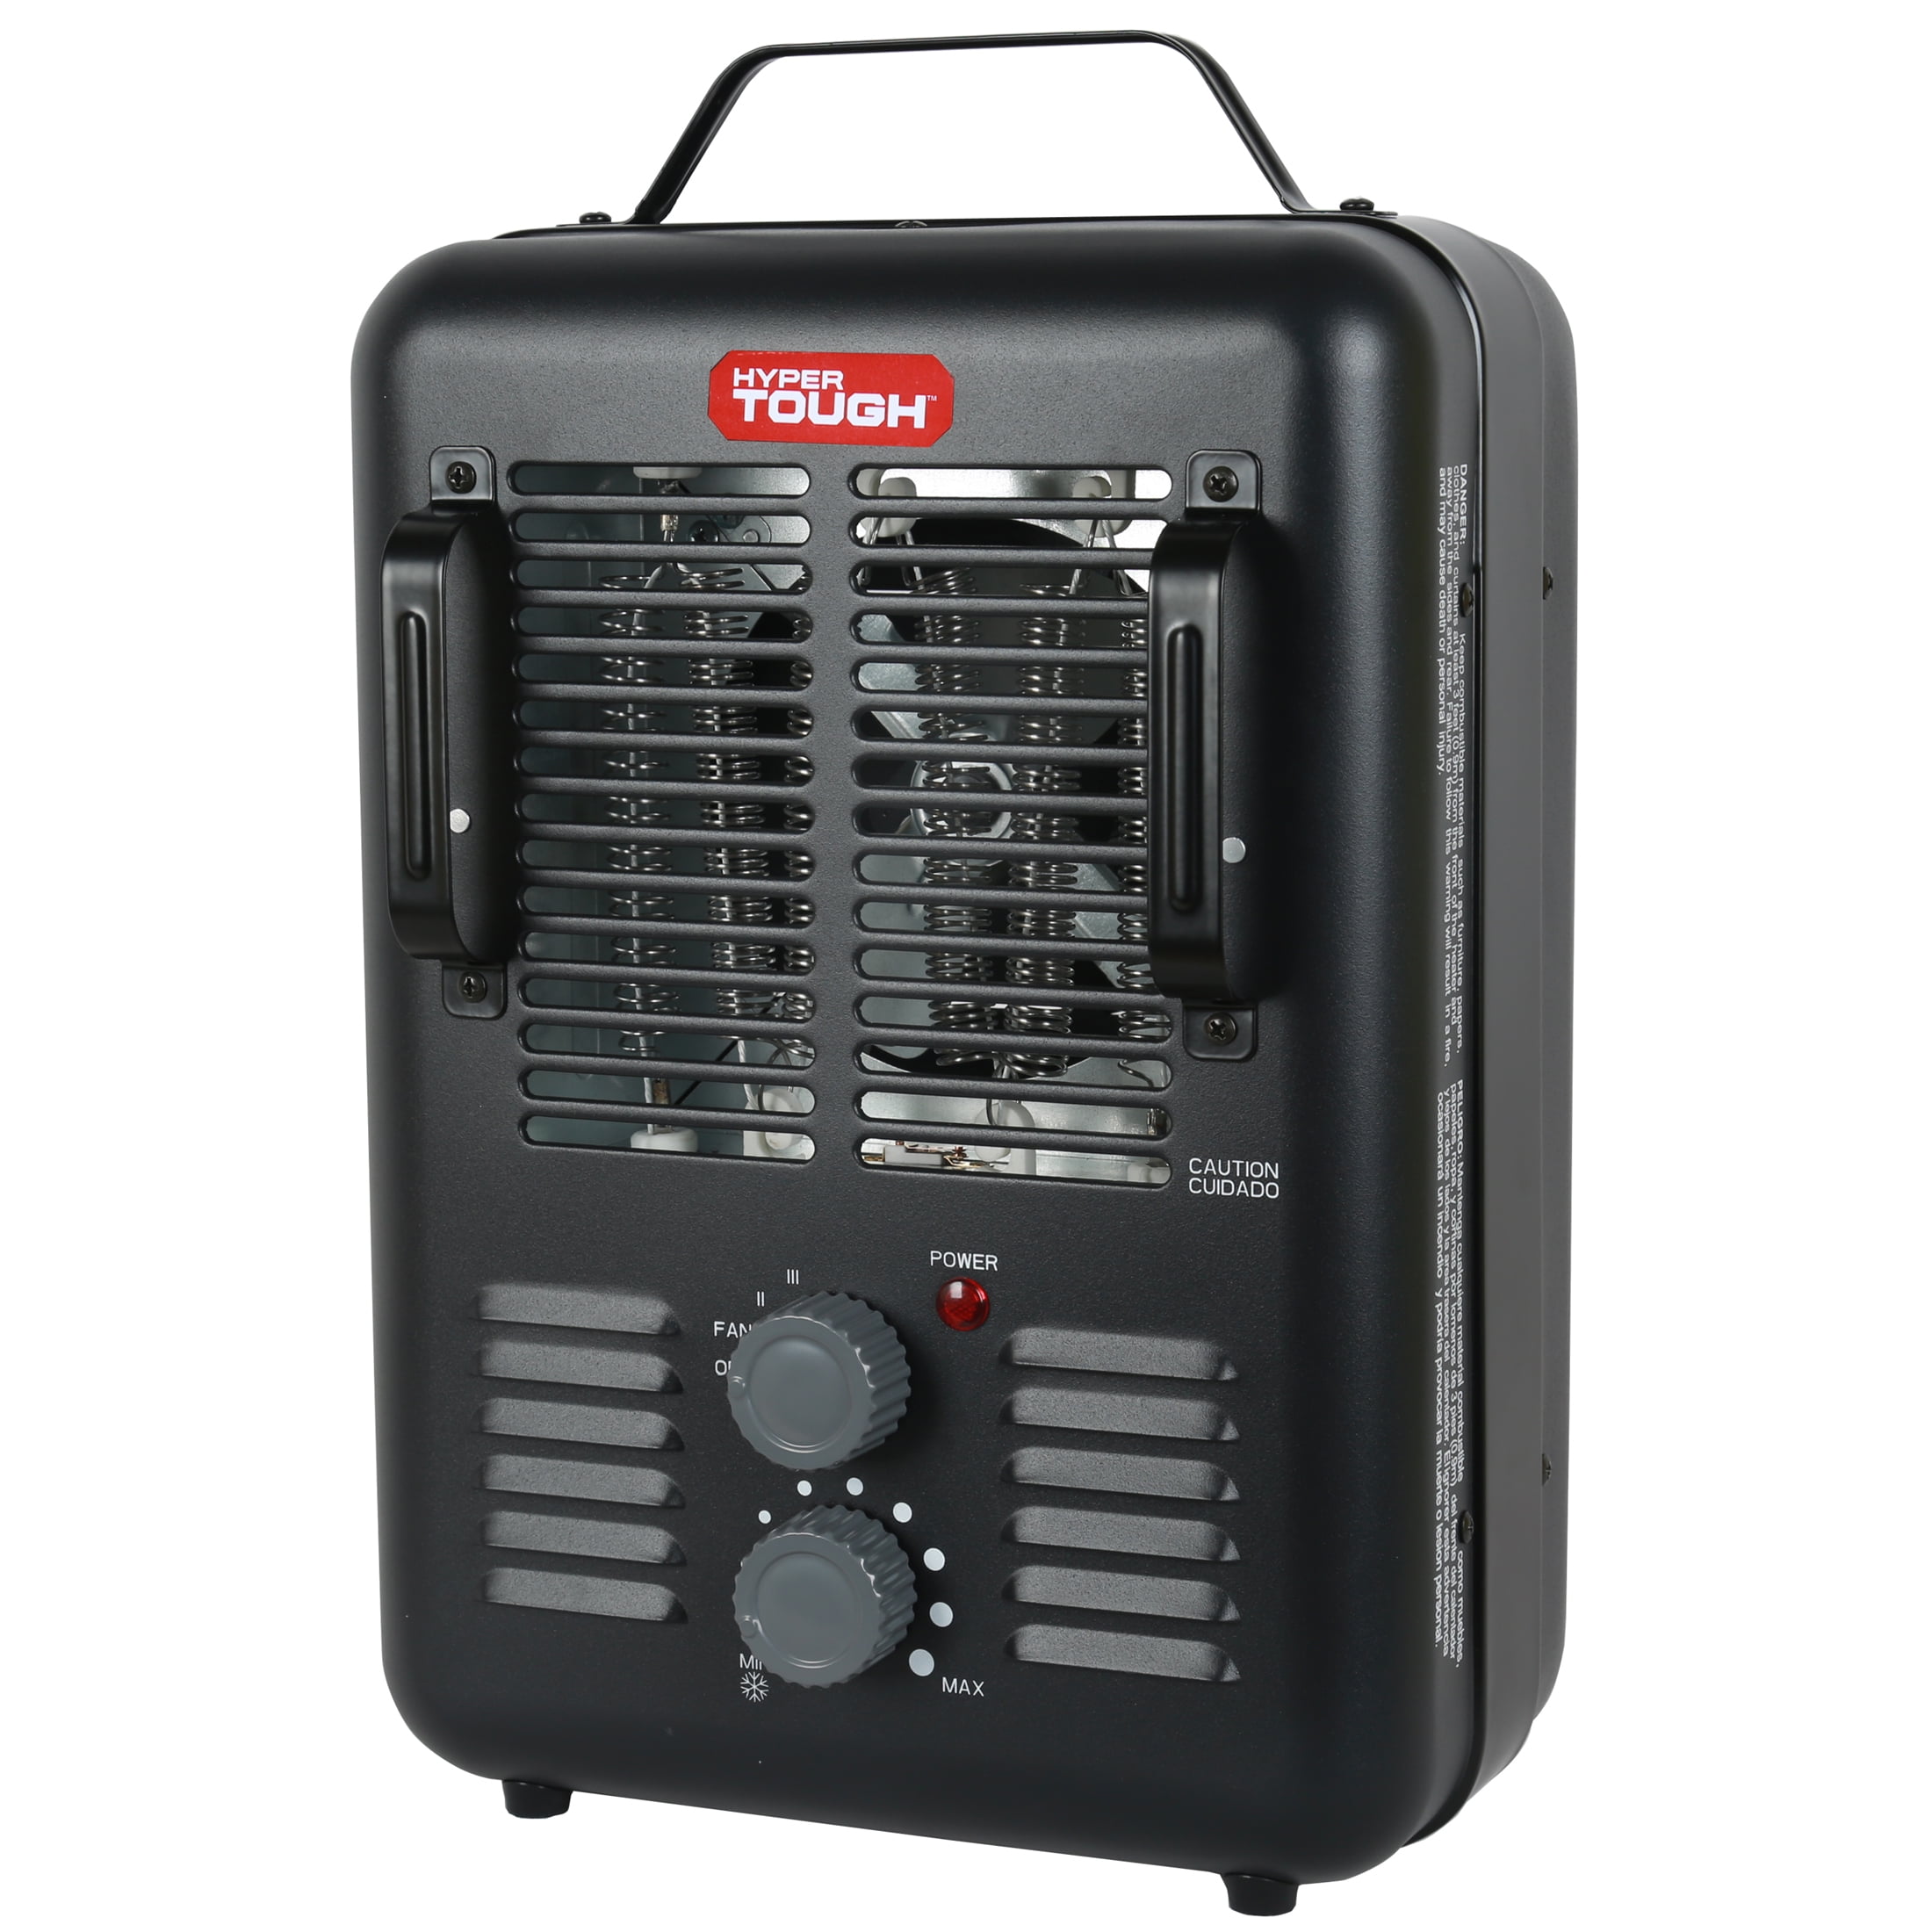 HeatWell Reviews - Obvious Hoax or Legit Heat Well Portable Heater